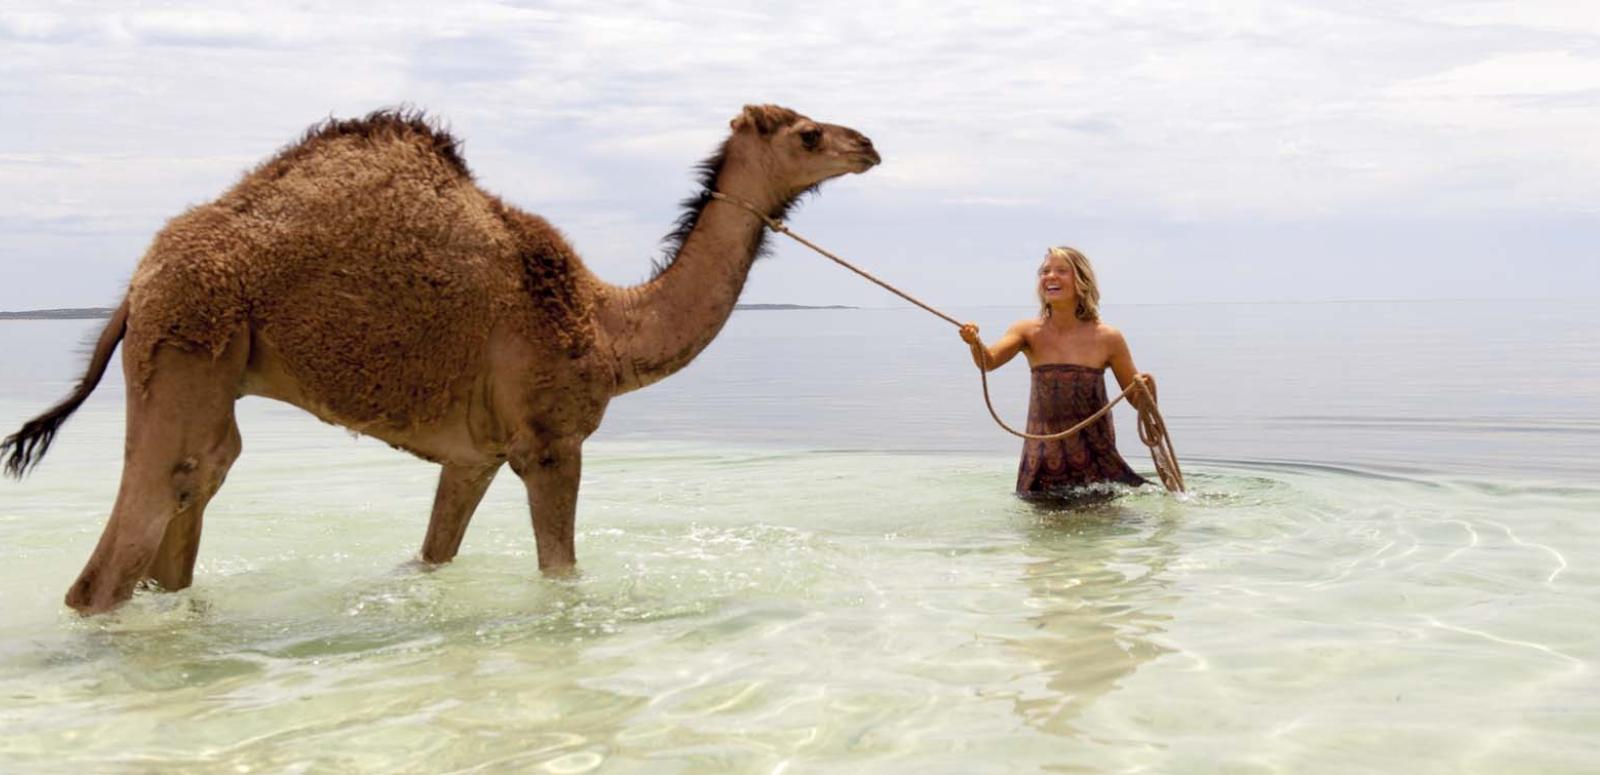 Mia Wasikowska leads a camel in the ocean in a scene from the film Tracks